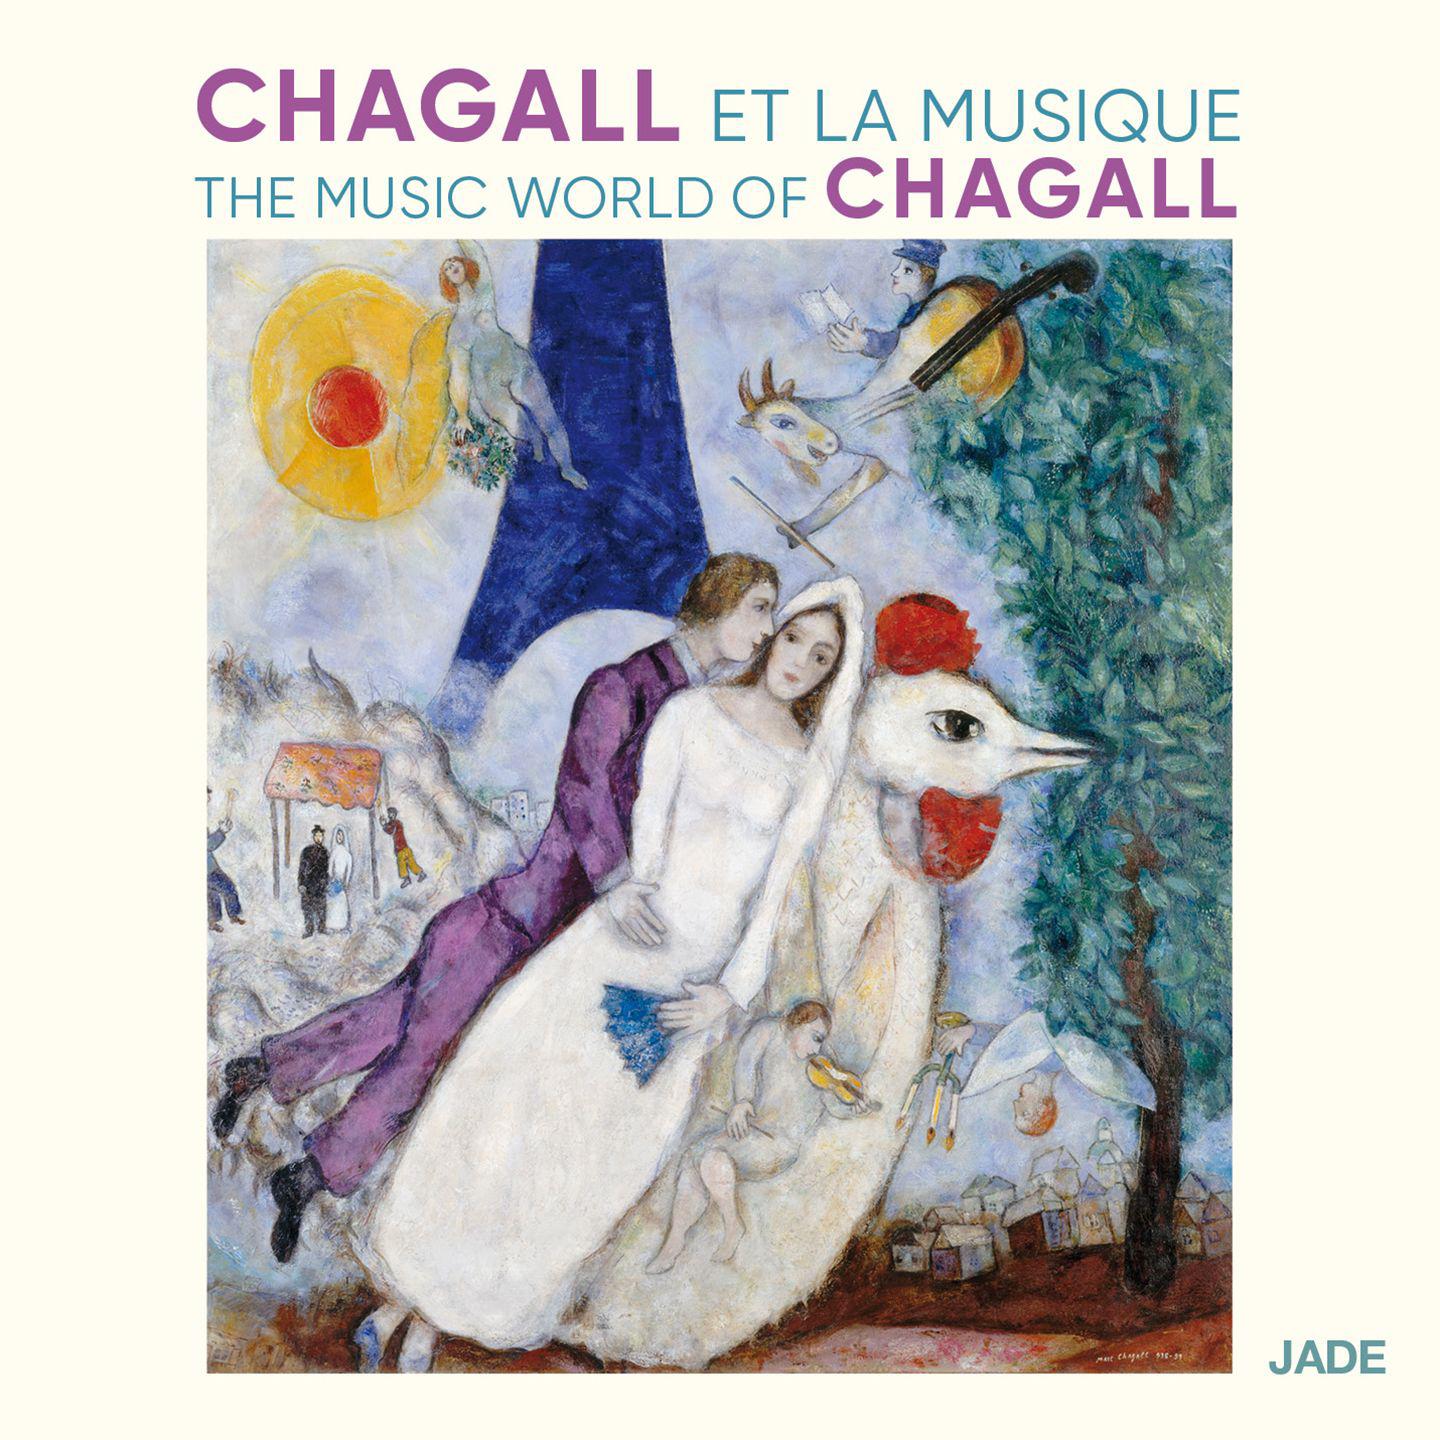 The Music World of Chagall